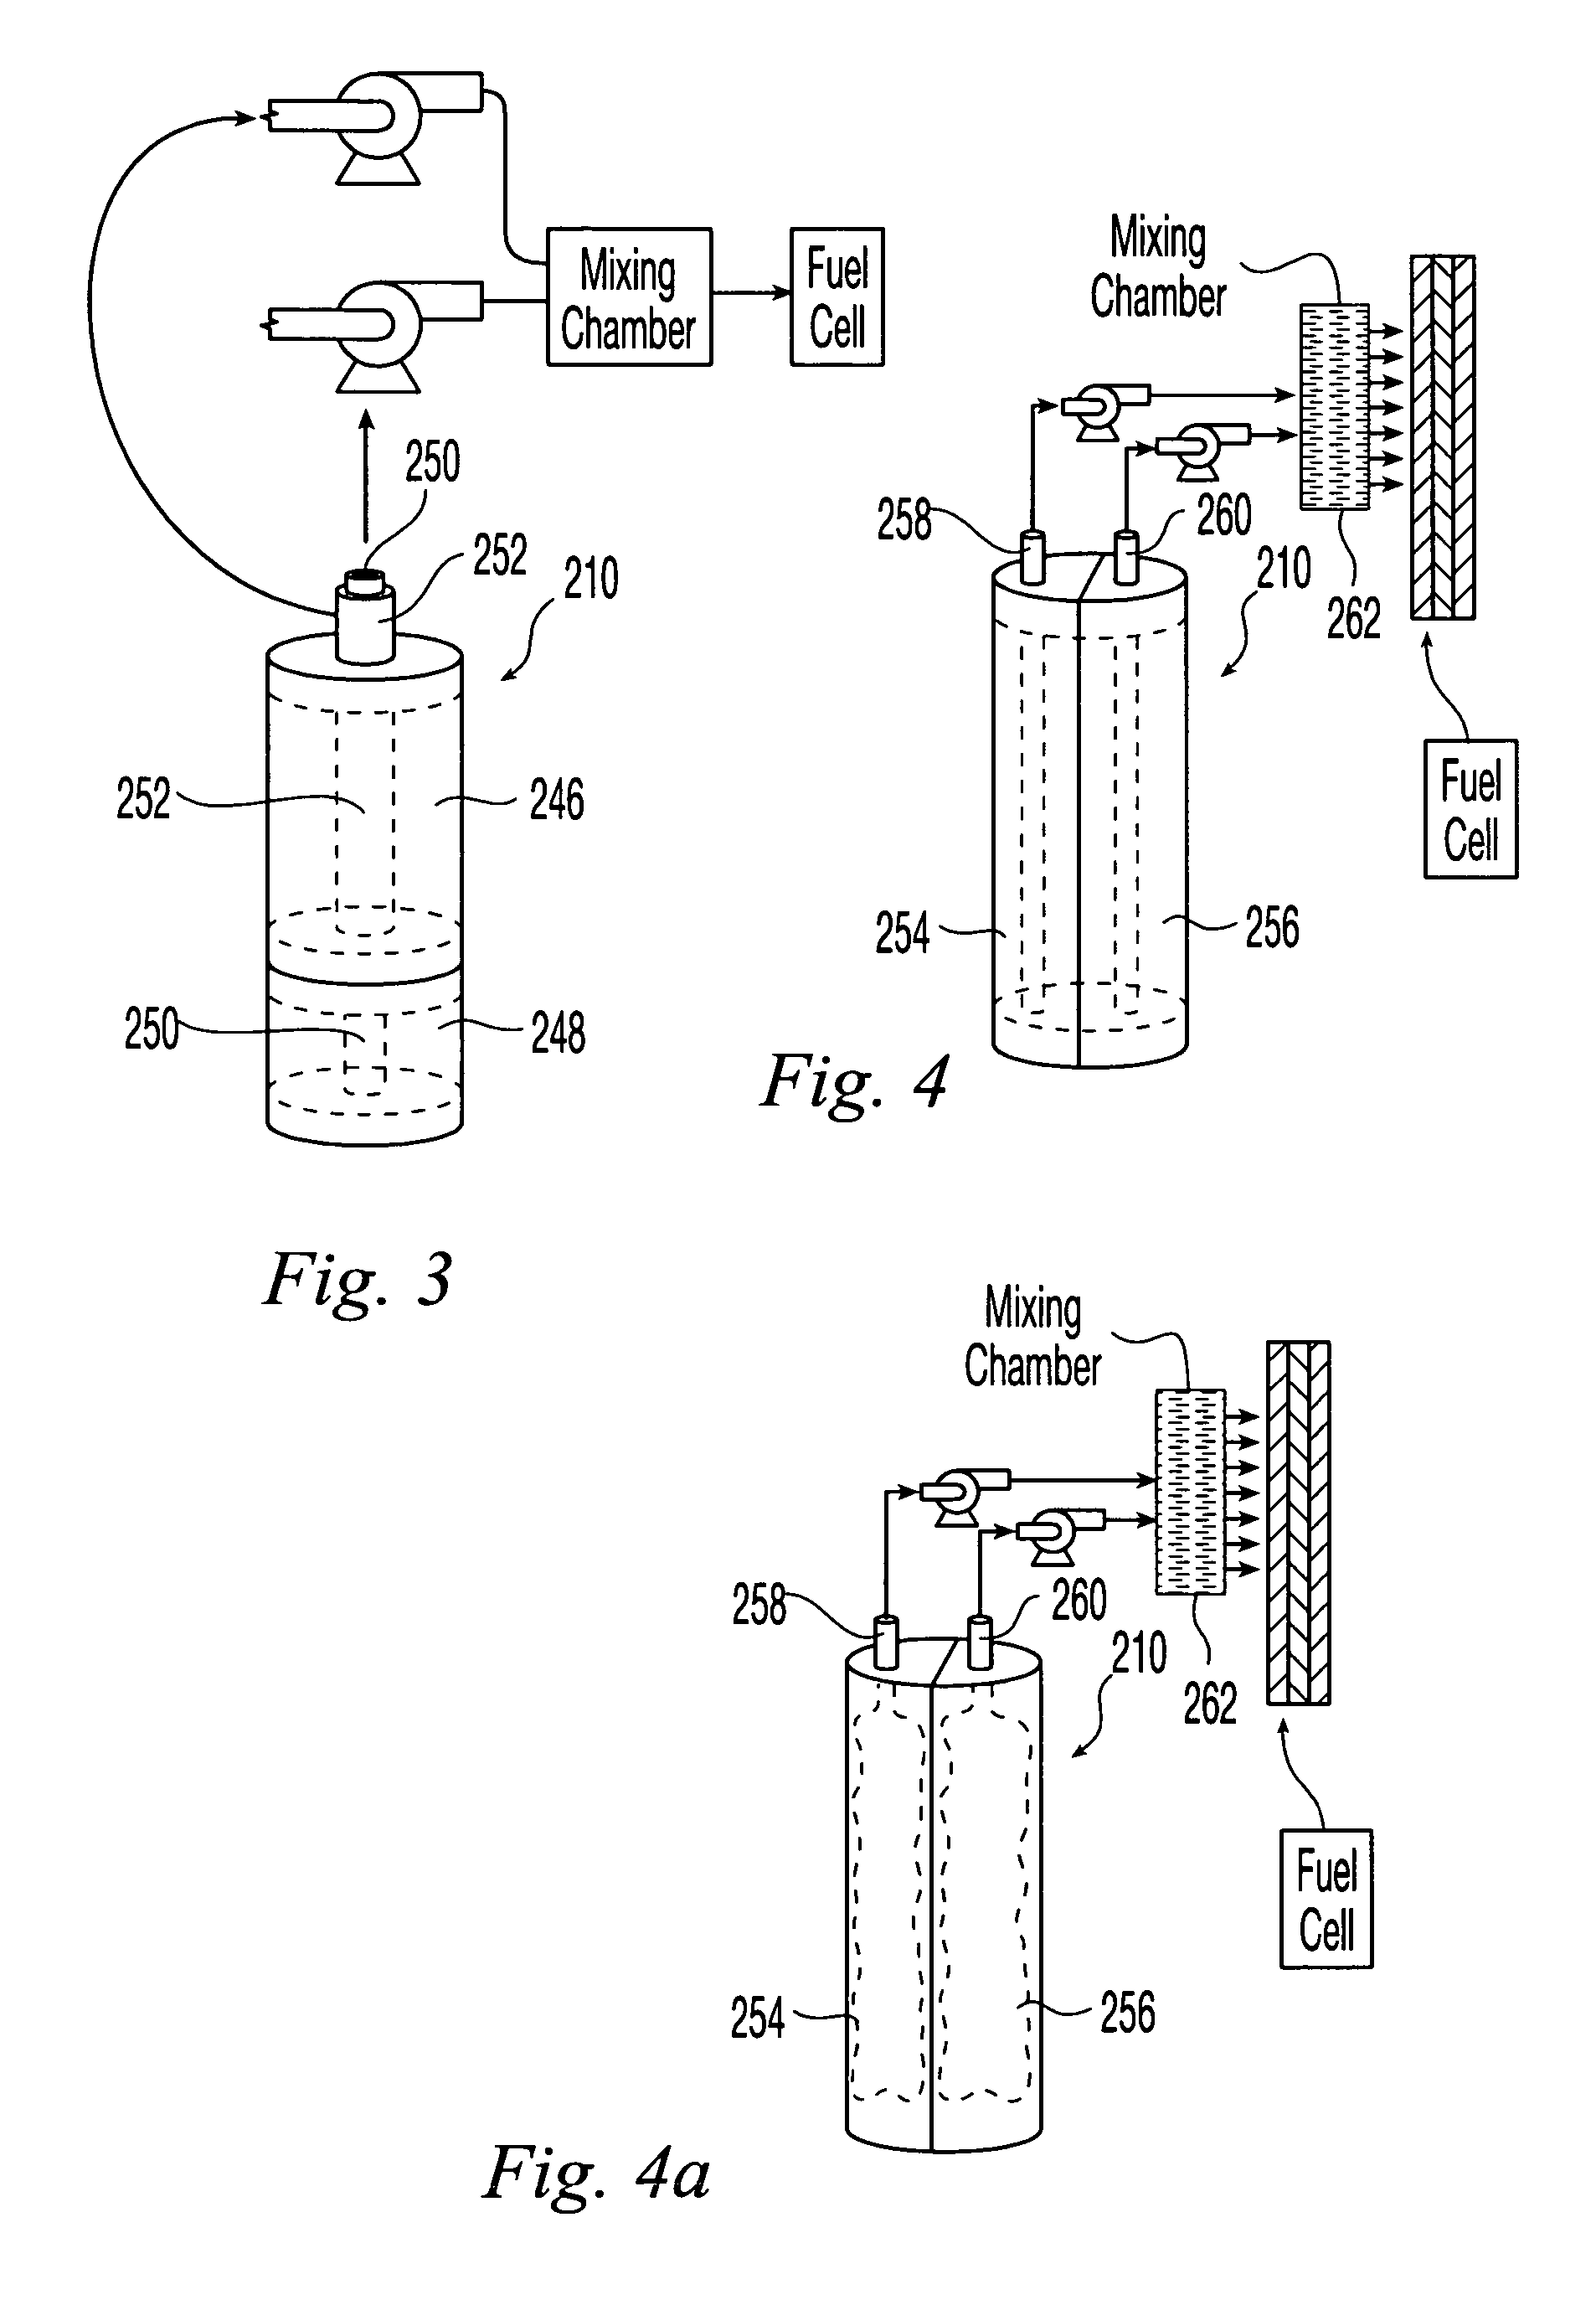 Apparatus and method for in situ production of fuel for a fuel cell